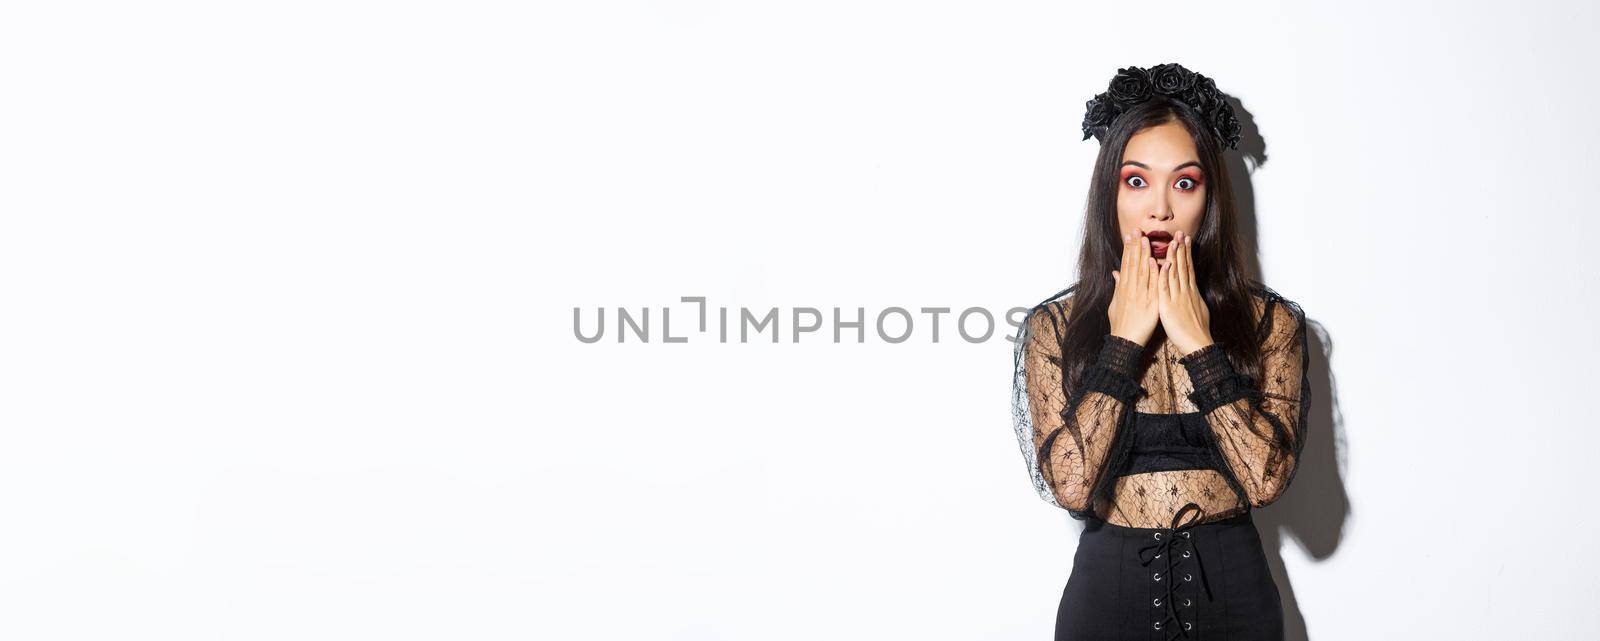 Surprised beautiful asian woman in witch costume looking amazed. Female wearing halloween gothic dress and wreath, open mouth aamused, standing over white background.